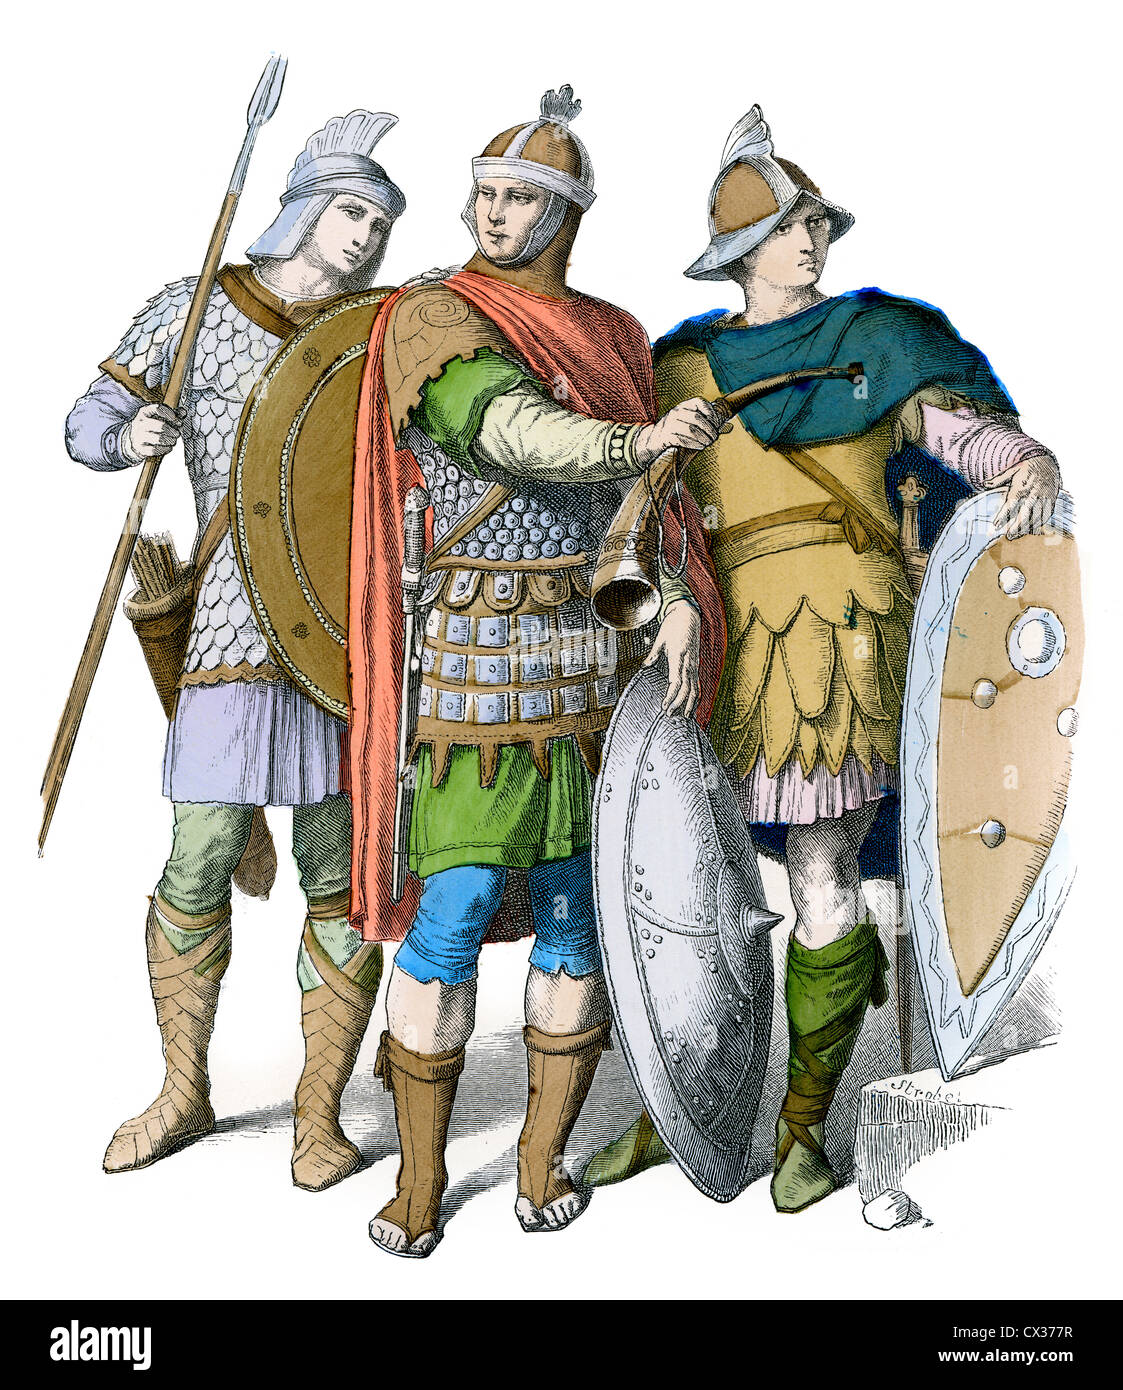 Frankish Warriors and Soldiers from the 5th to 10th Century Period Stock Photo